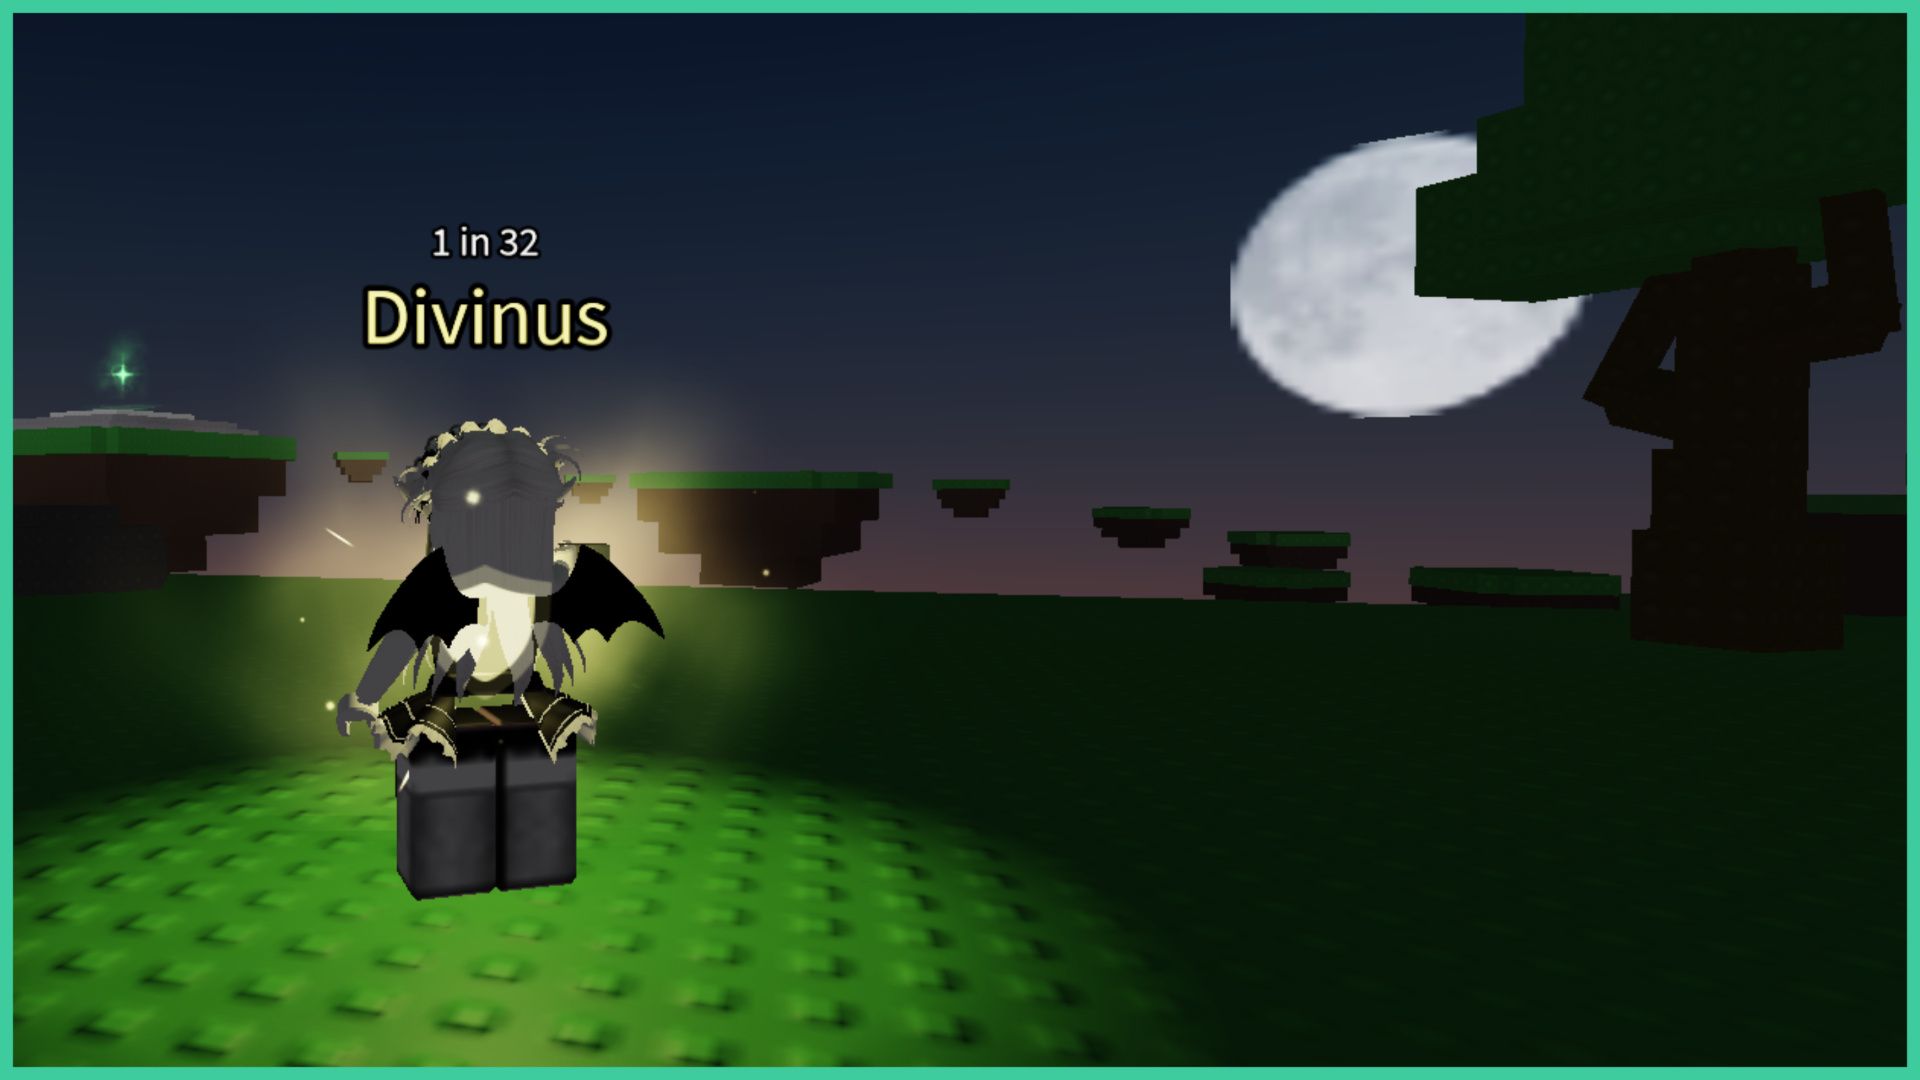 feature image for our sol's rng raining guide, the image features a screenshot of a roblox player standing on a grass platform looking out to the floating obstacle course platforms in the distance, as the moon glows in the sky behind the silhouette of a tree, the roblox player is wearing the divinus aura, which is a glowing yellow aura with a shield symbol on their torso